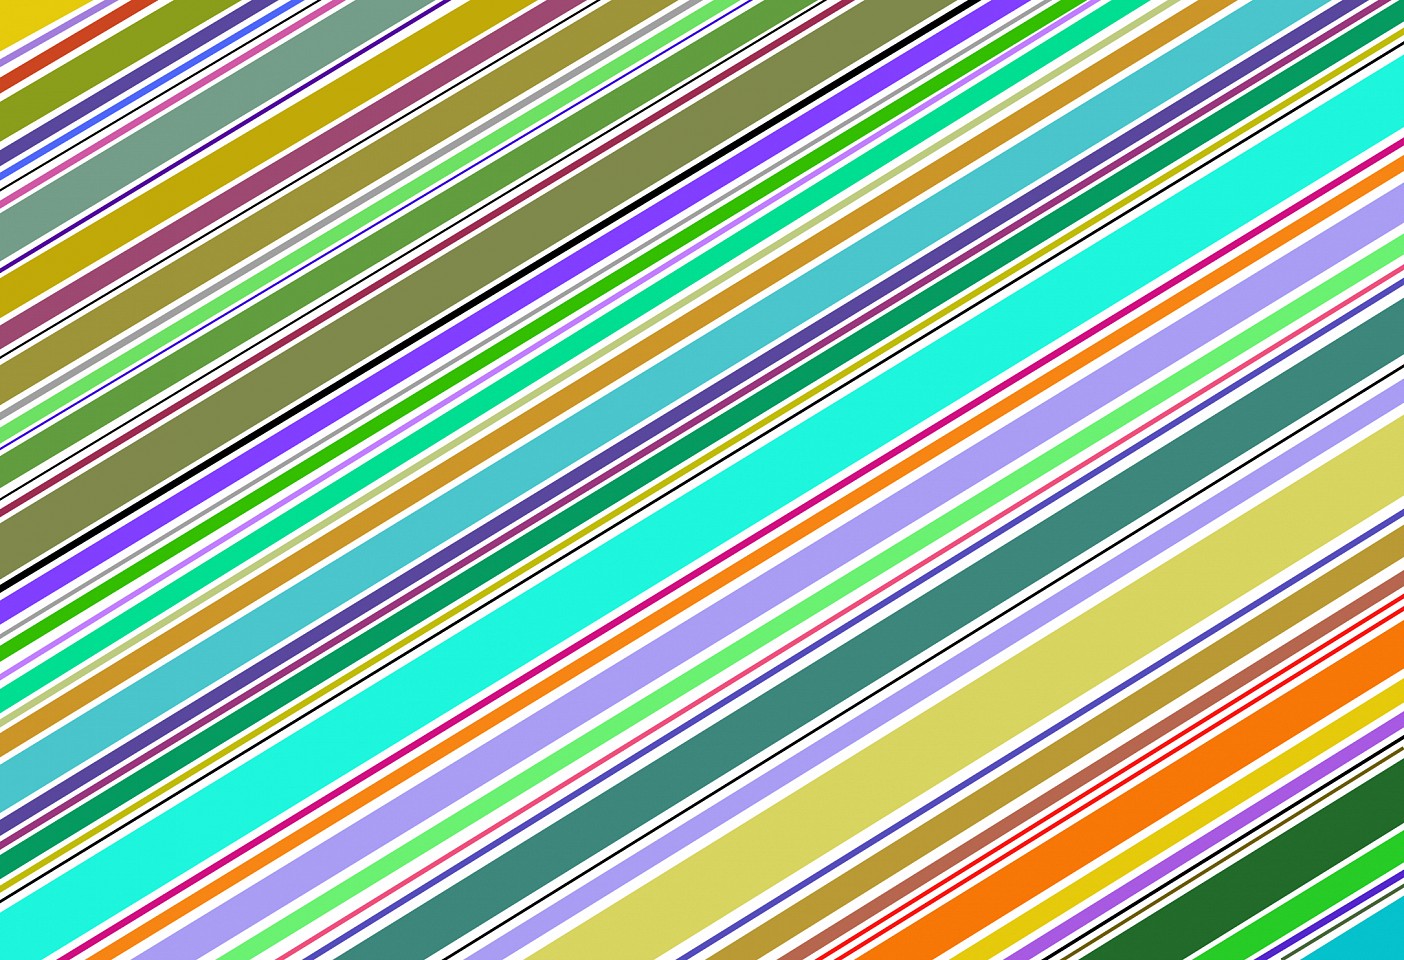 Dane Albert, Color Sticks #17, 2023
Acrylic on canvas (Concept), 48 x 72 in. (121.9 x 182.9 cm)
Series of colored lines and shapes in multiple configurations
DA.2023.sticks-017